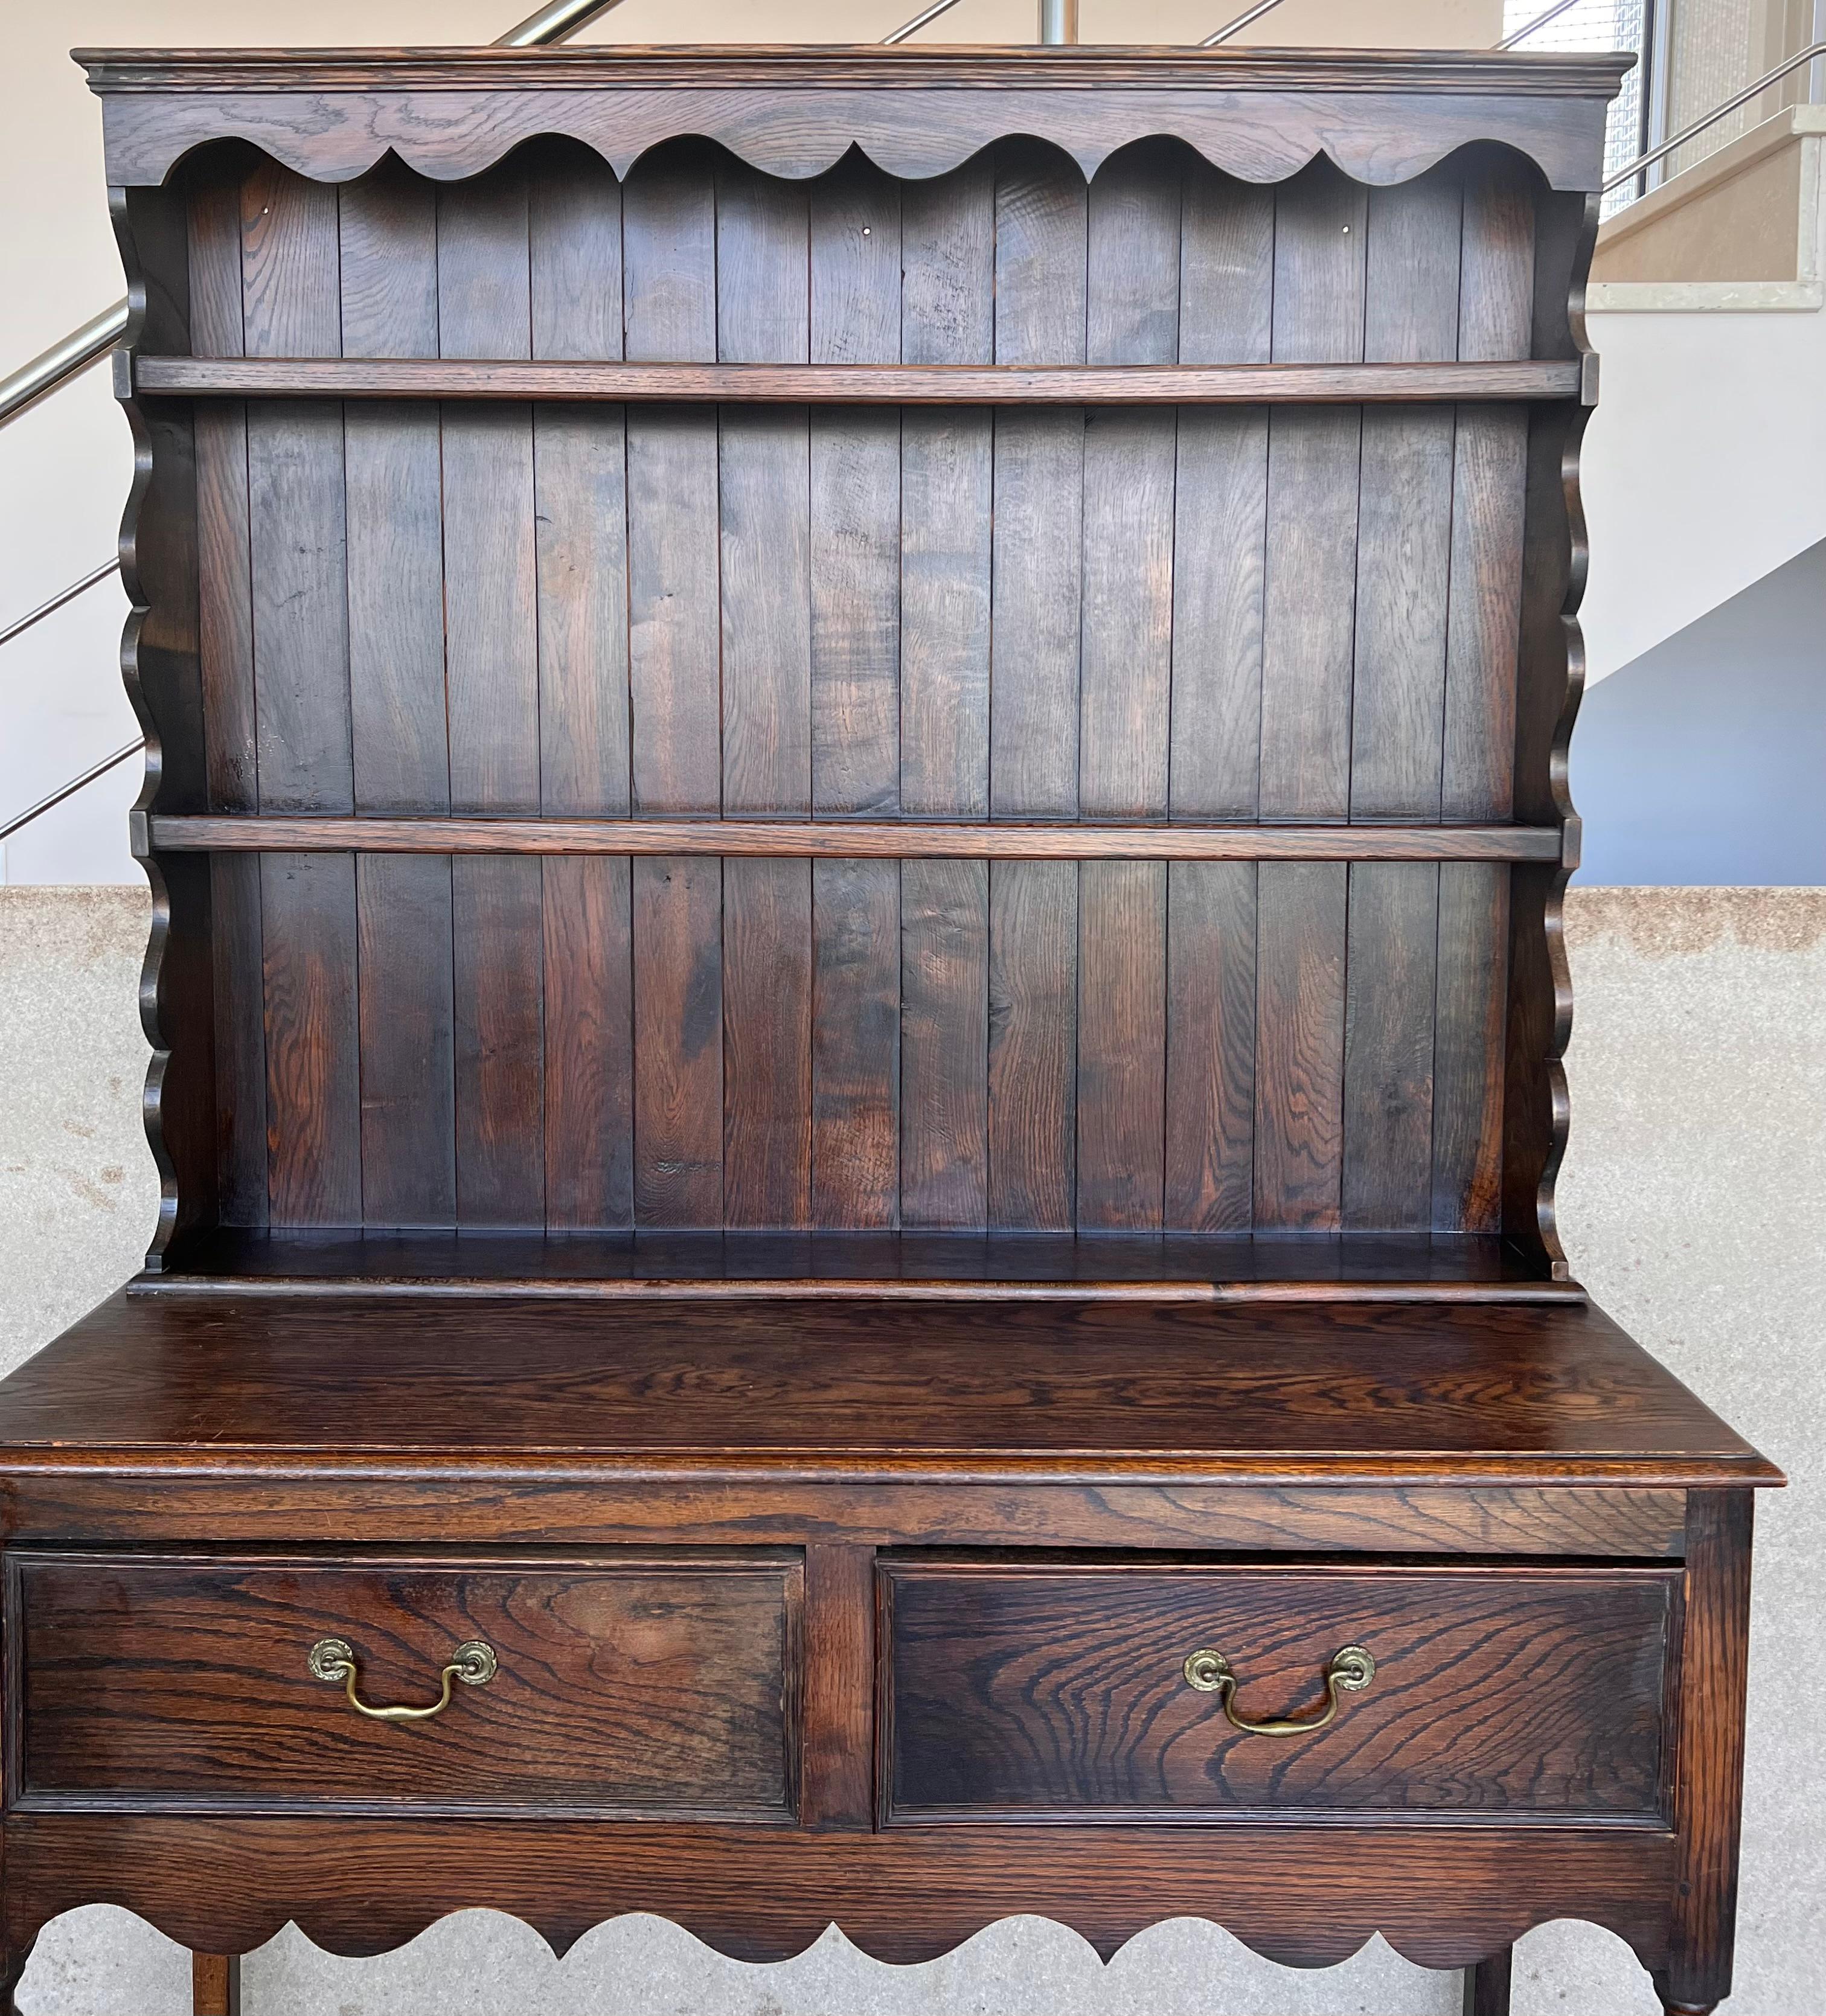 19th Century 18th Century Welsh Pot Board Dresser with two Drawers and Rack